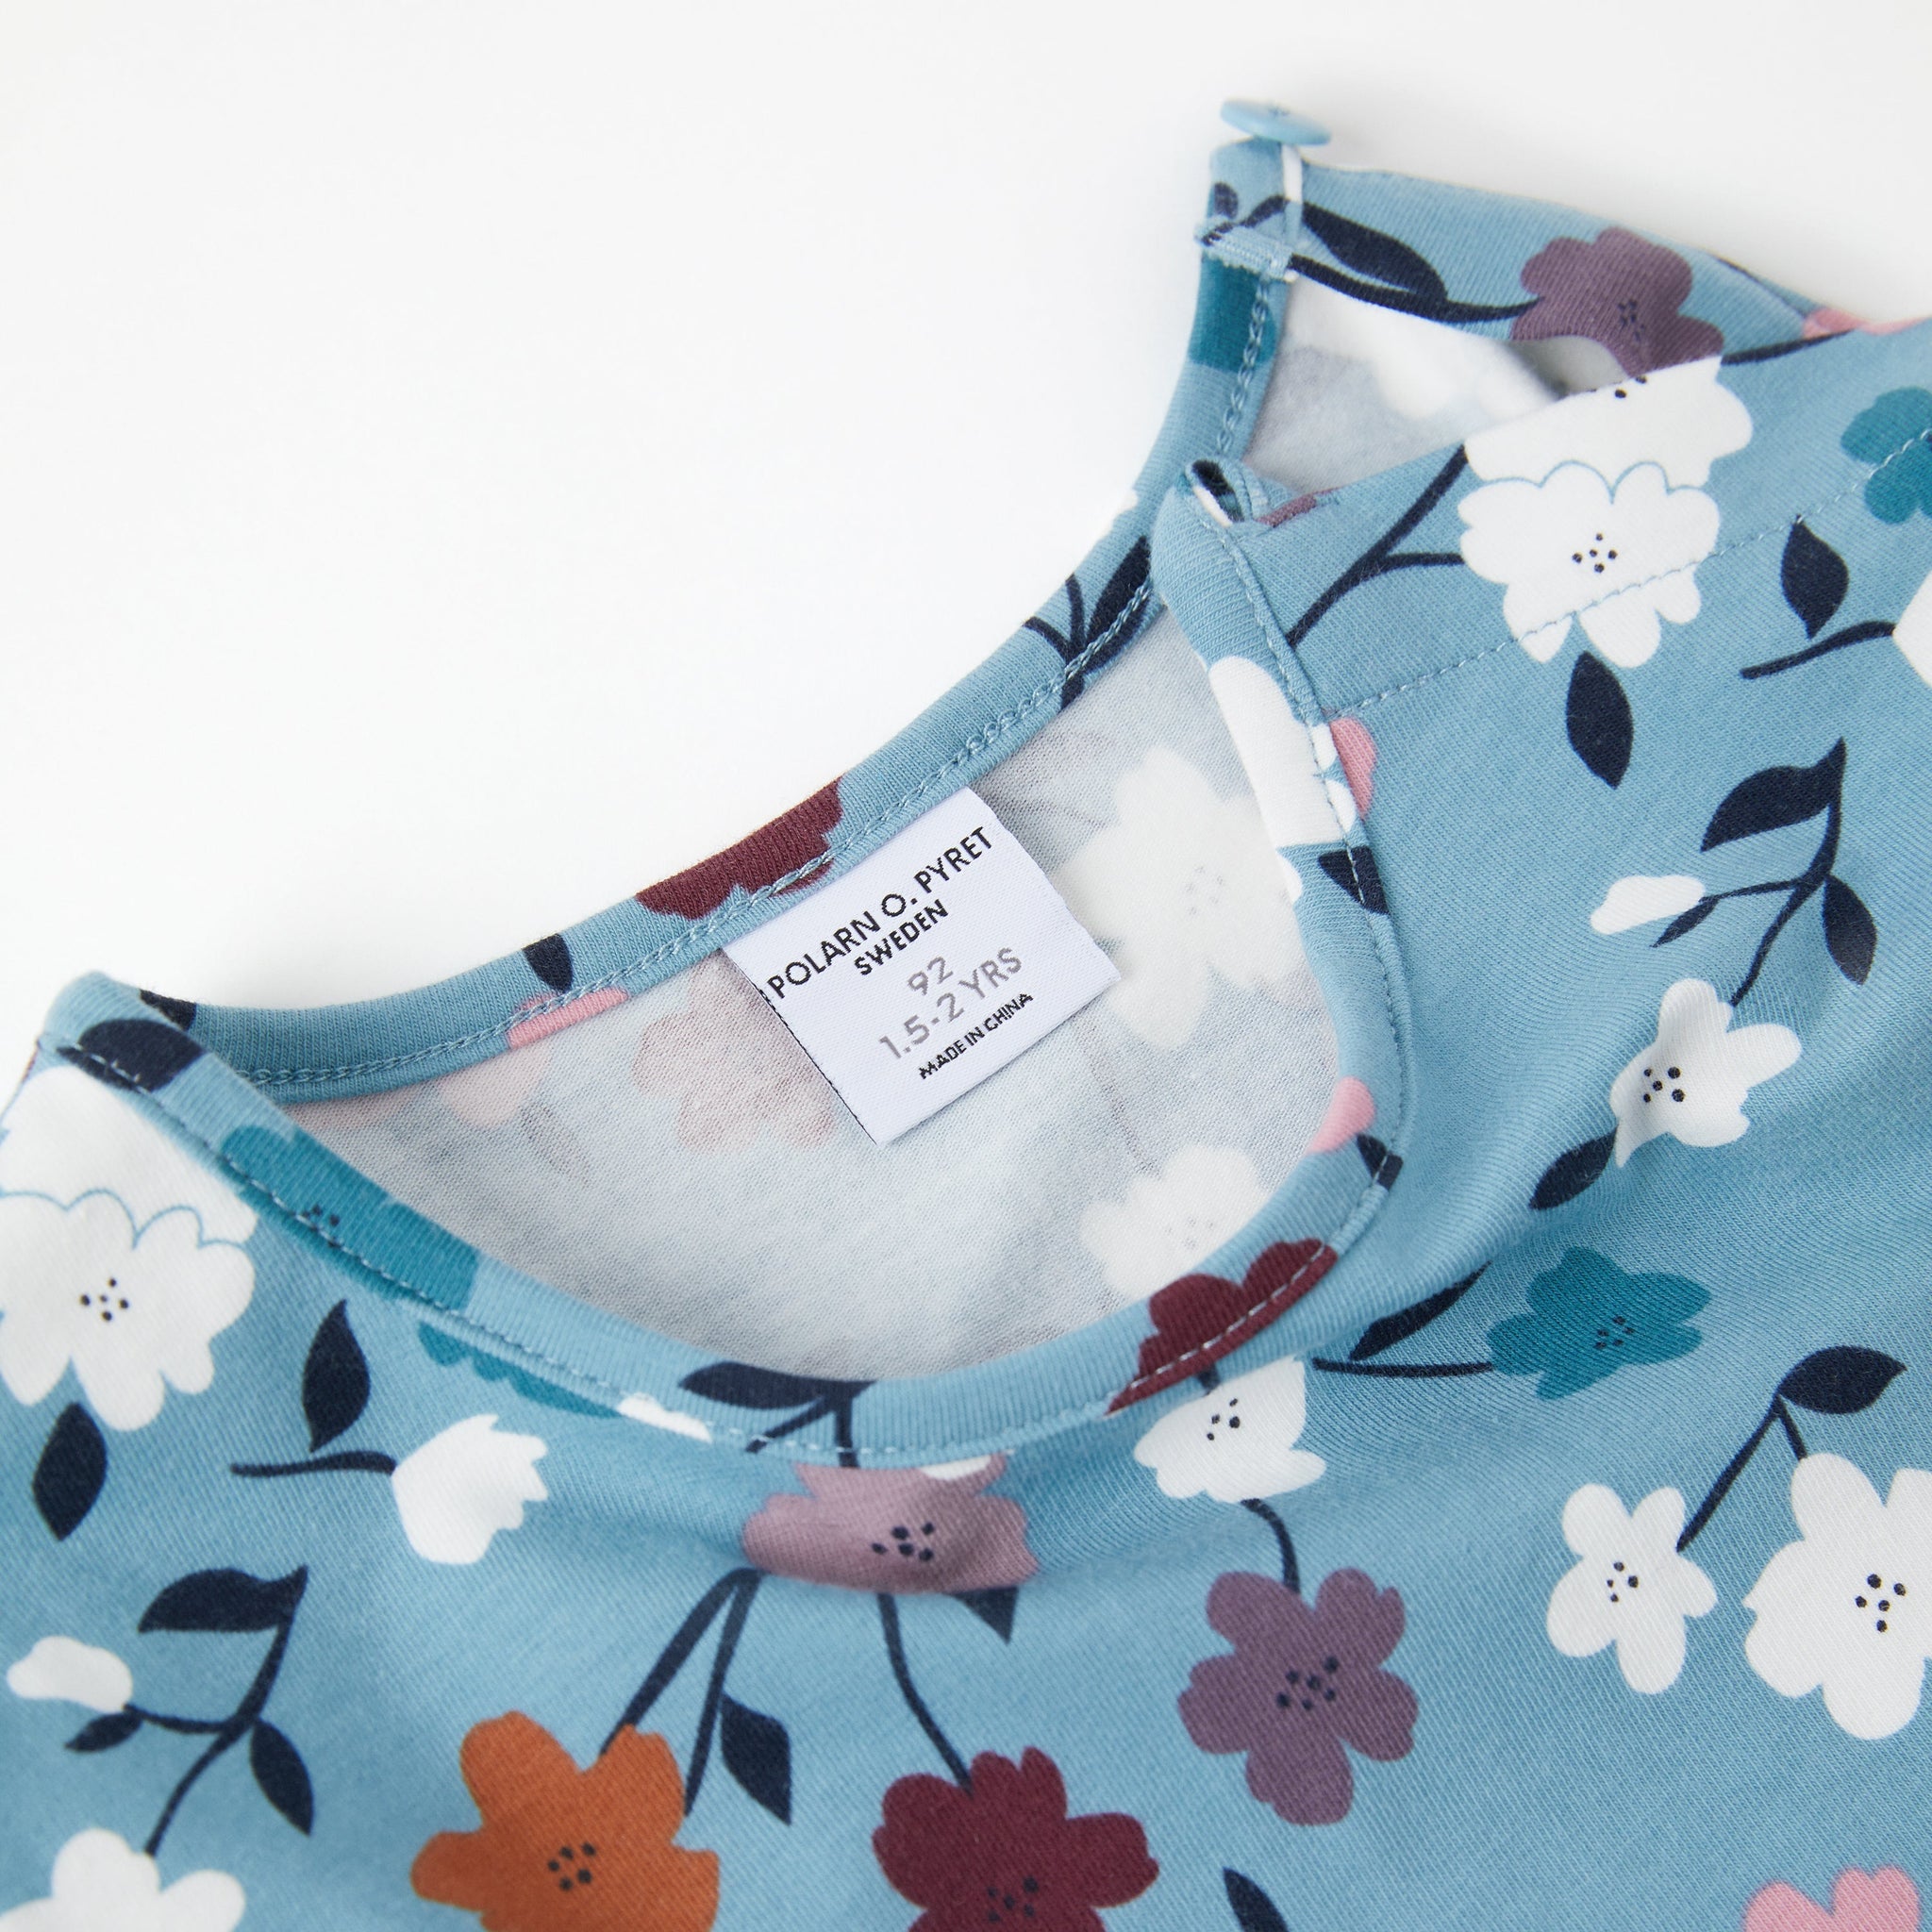 Cotton Blue Floral Girls Dress from the Polarn O. Pyret kidswear collection. Nordic kids clothes made from sustainable sources.